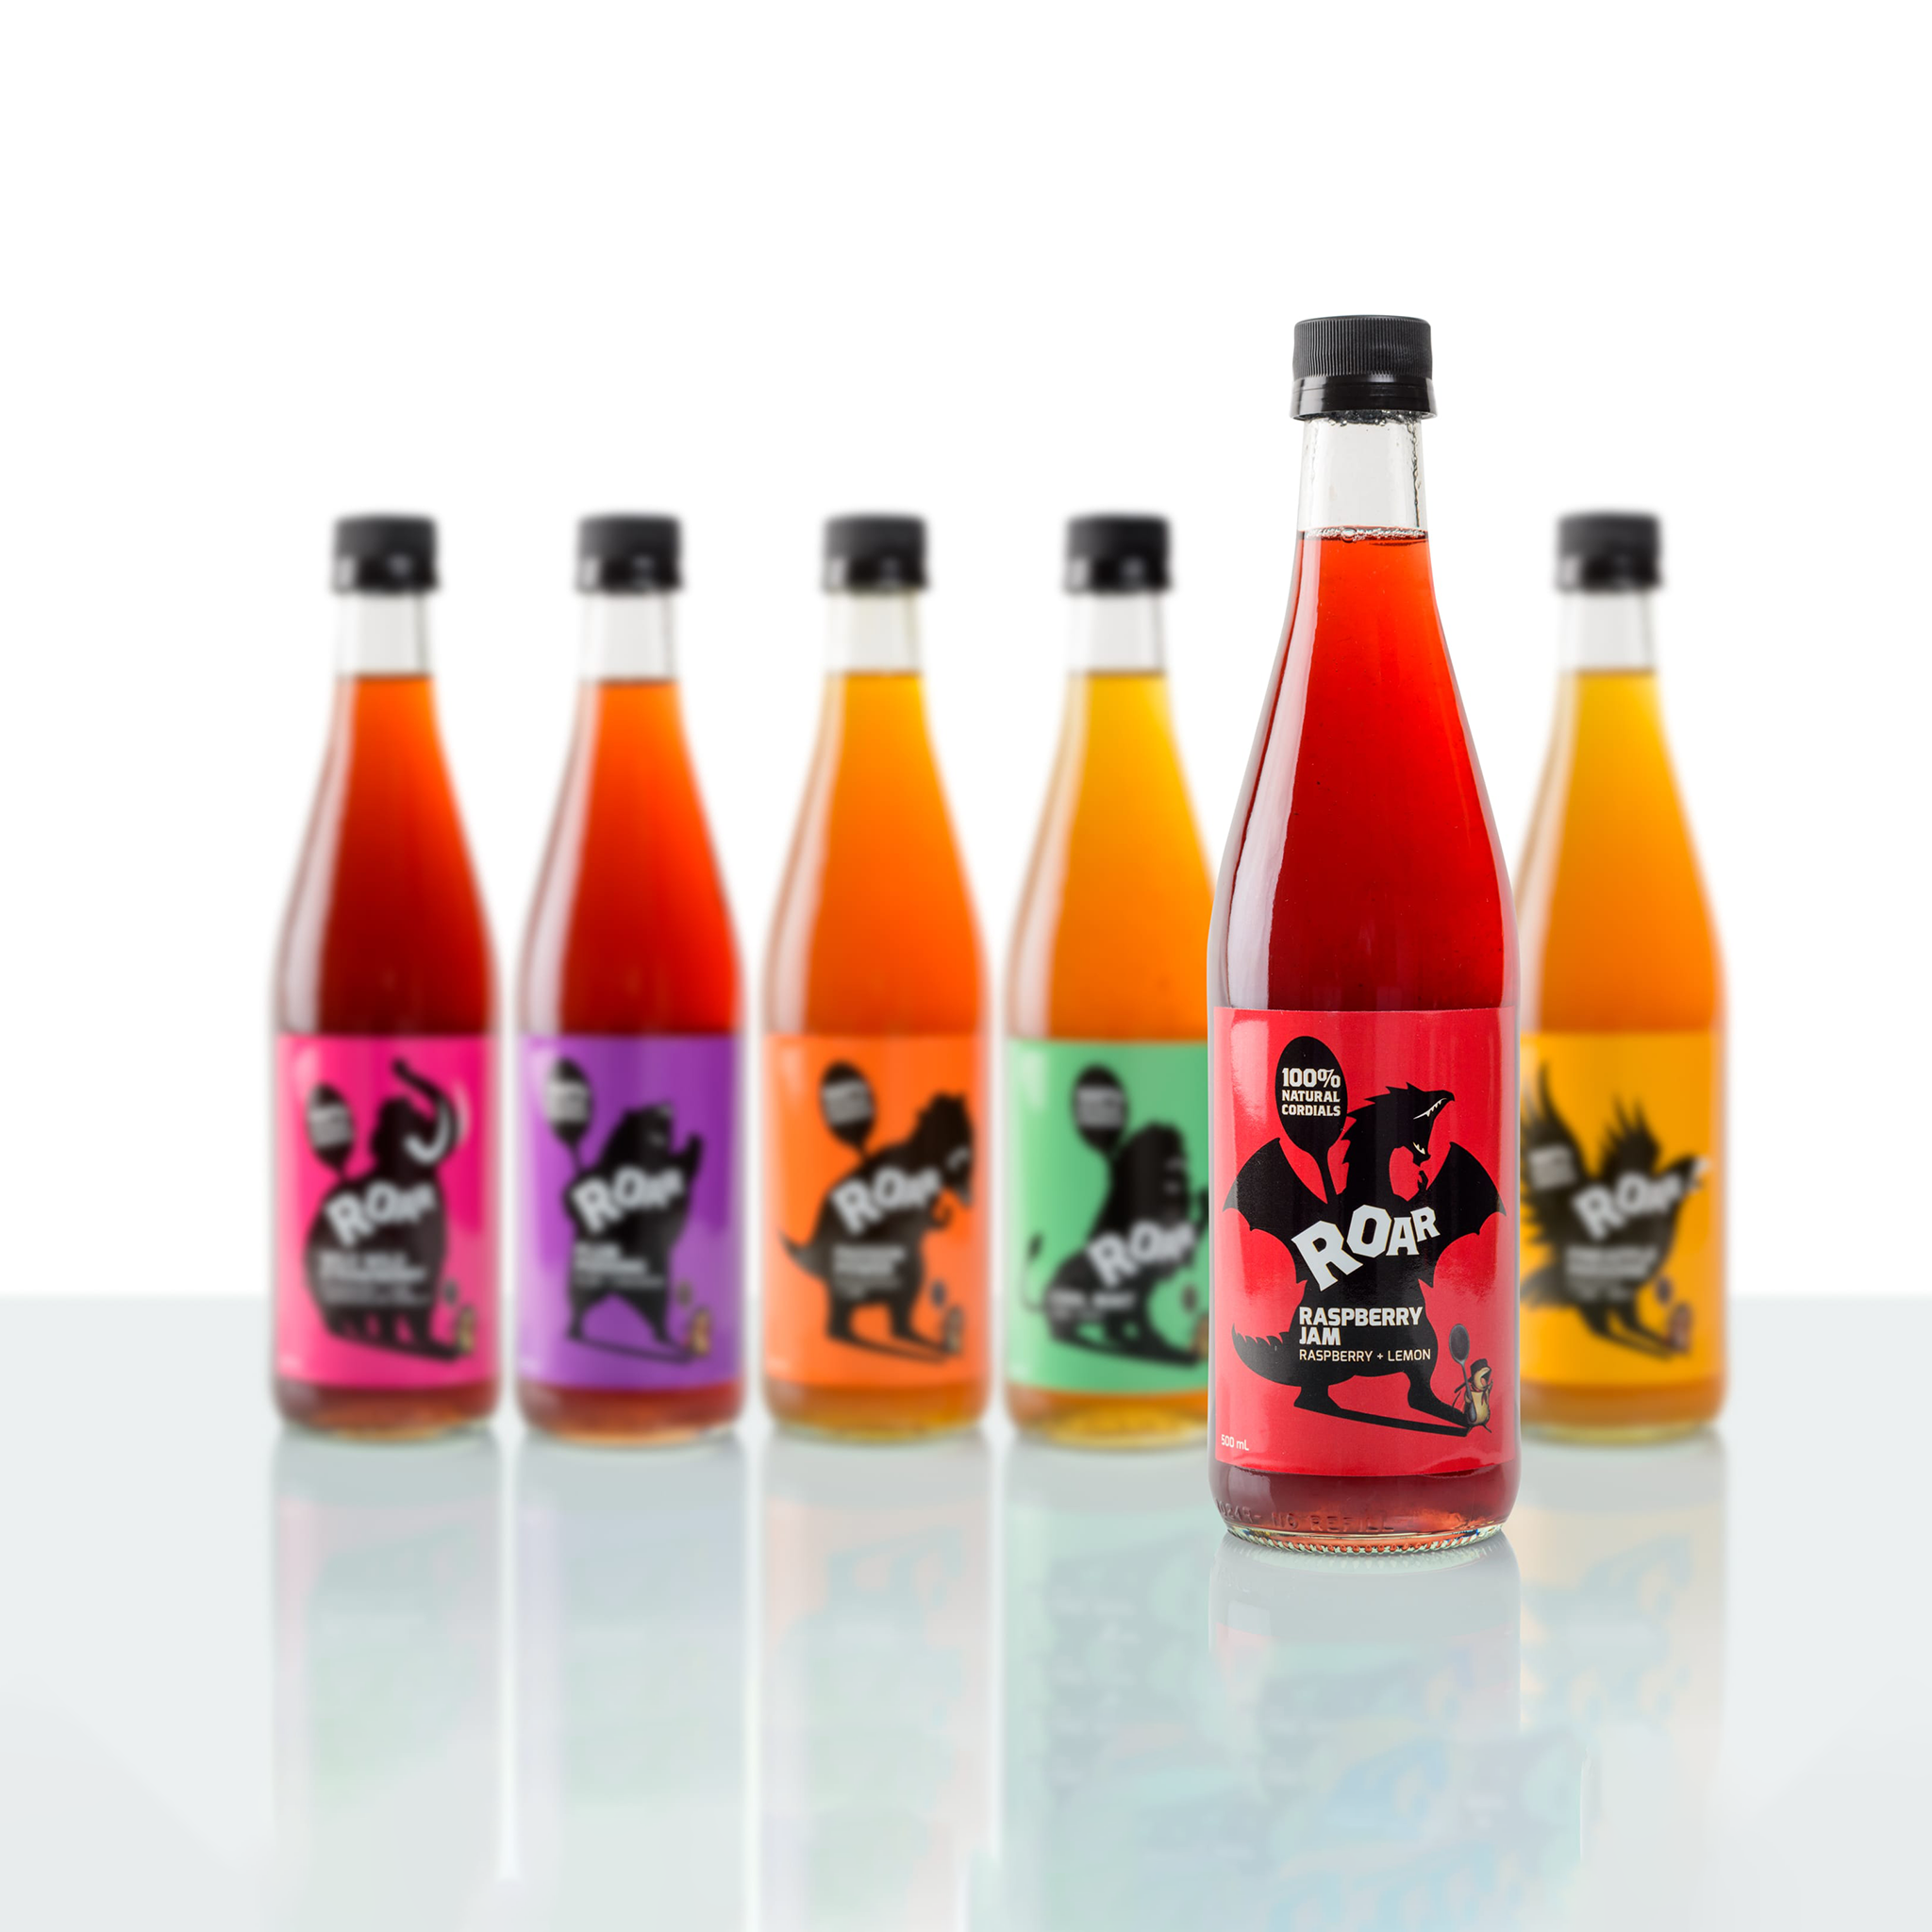 Group photo of Roar Living 100% natural cordial collection with raspberry cordial standing out